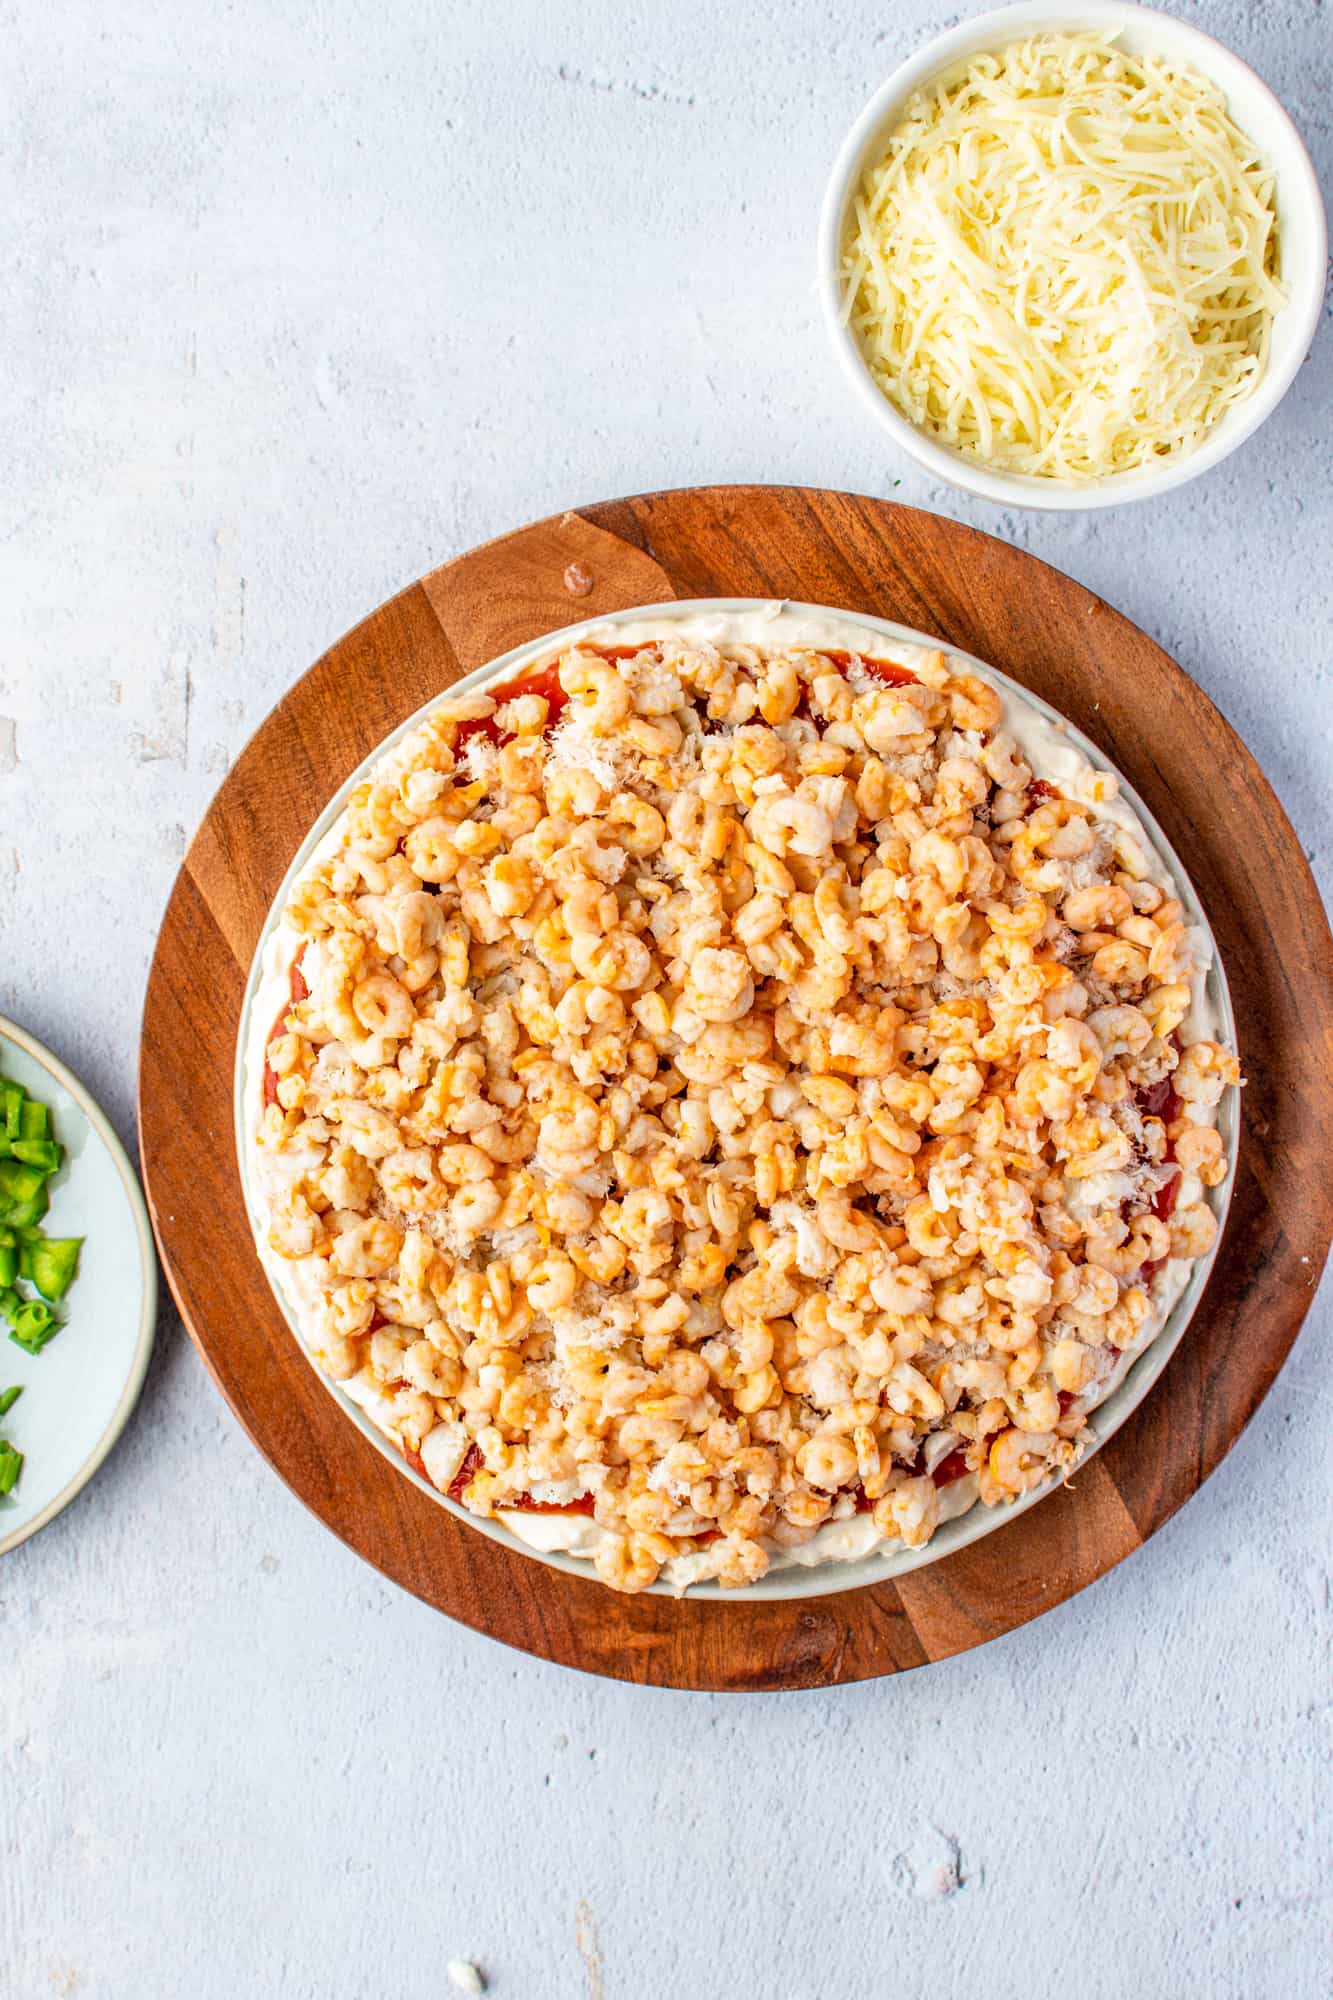 tiny shrimp spread evenly onto crab meat inside a large white platter.